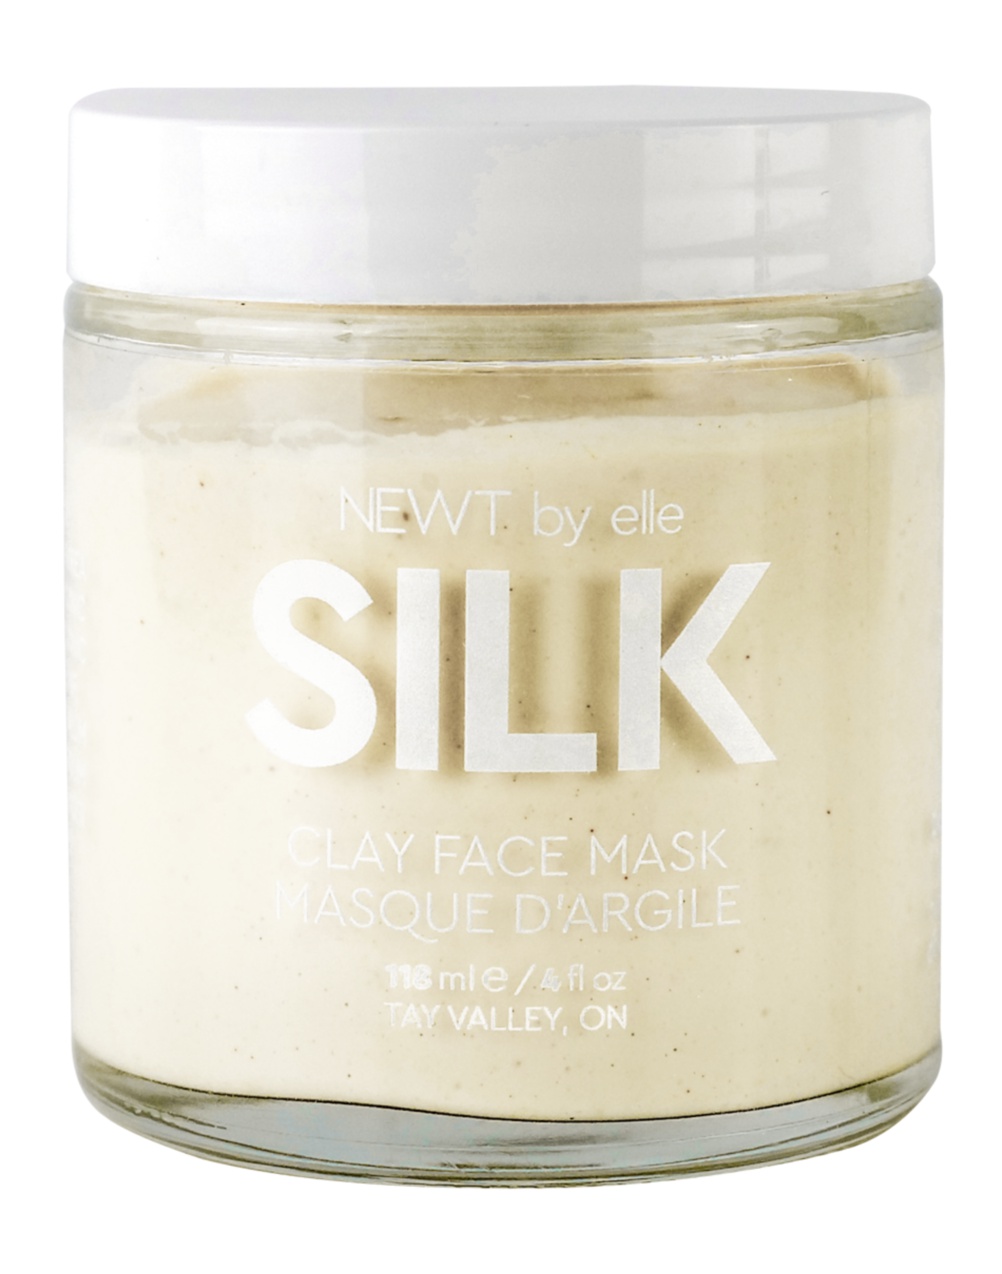 NEWT by elle Silk Clay Face Mask